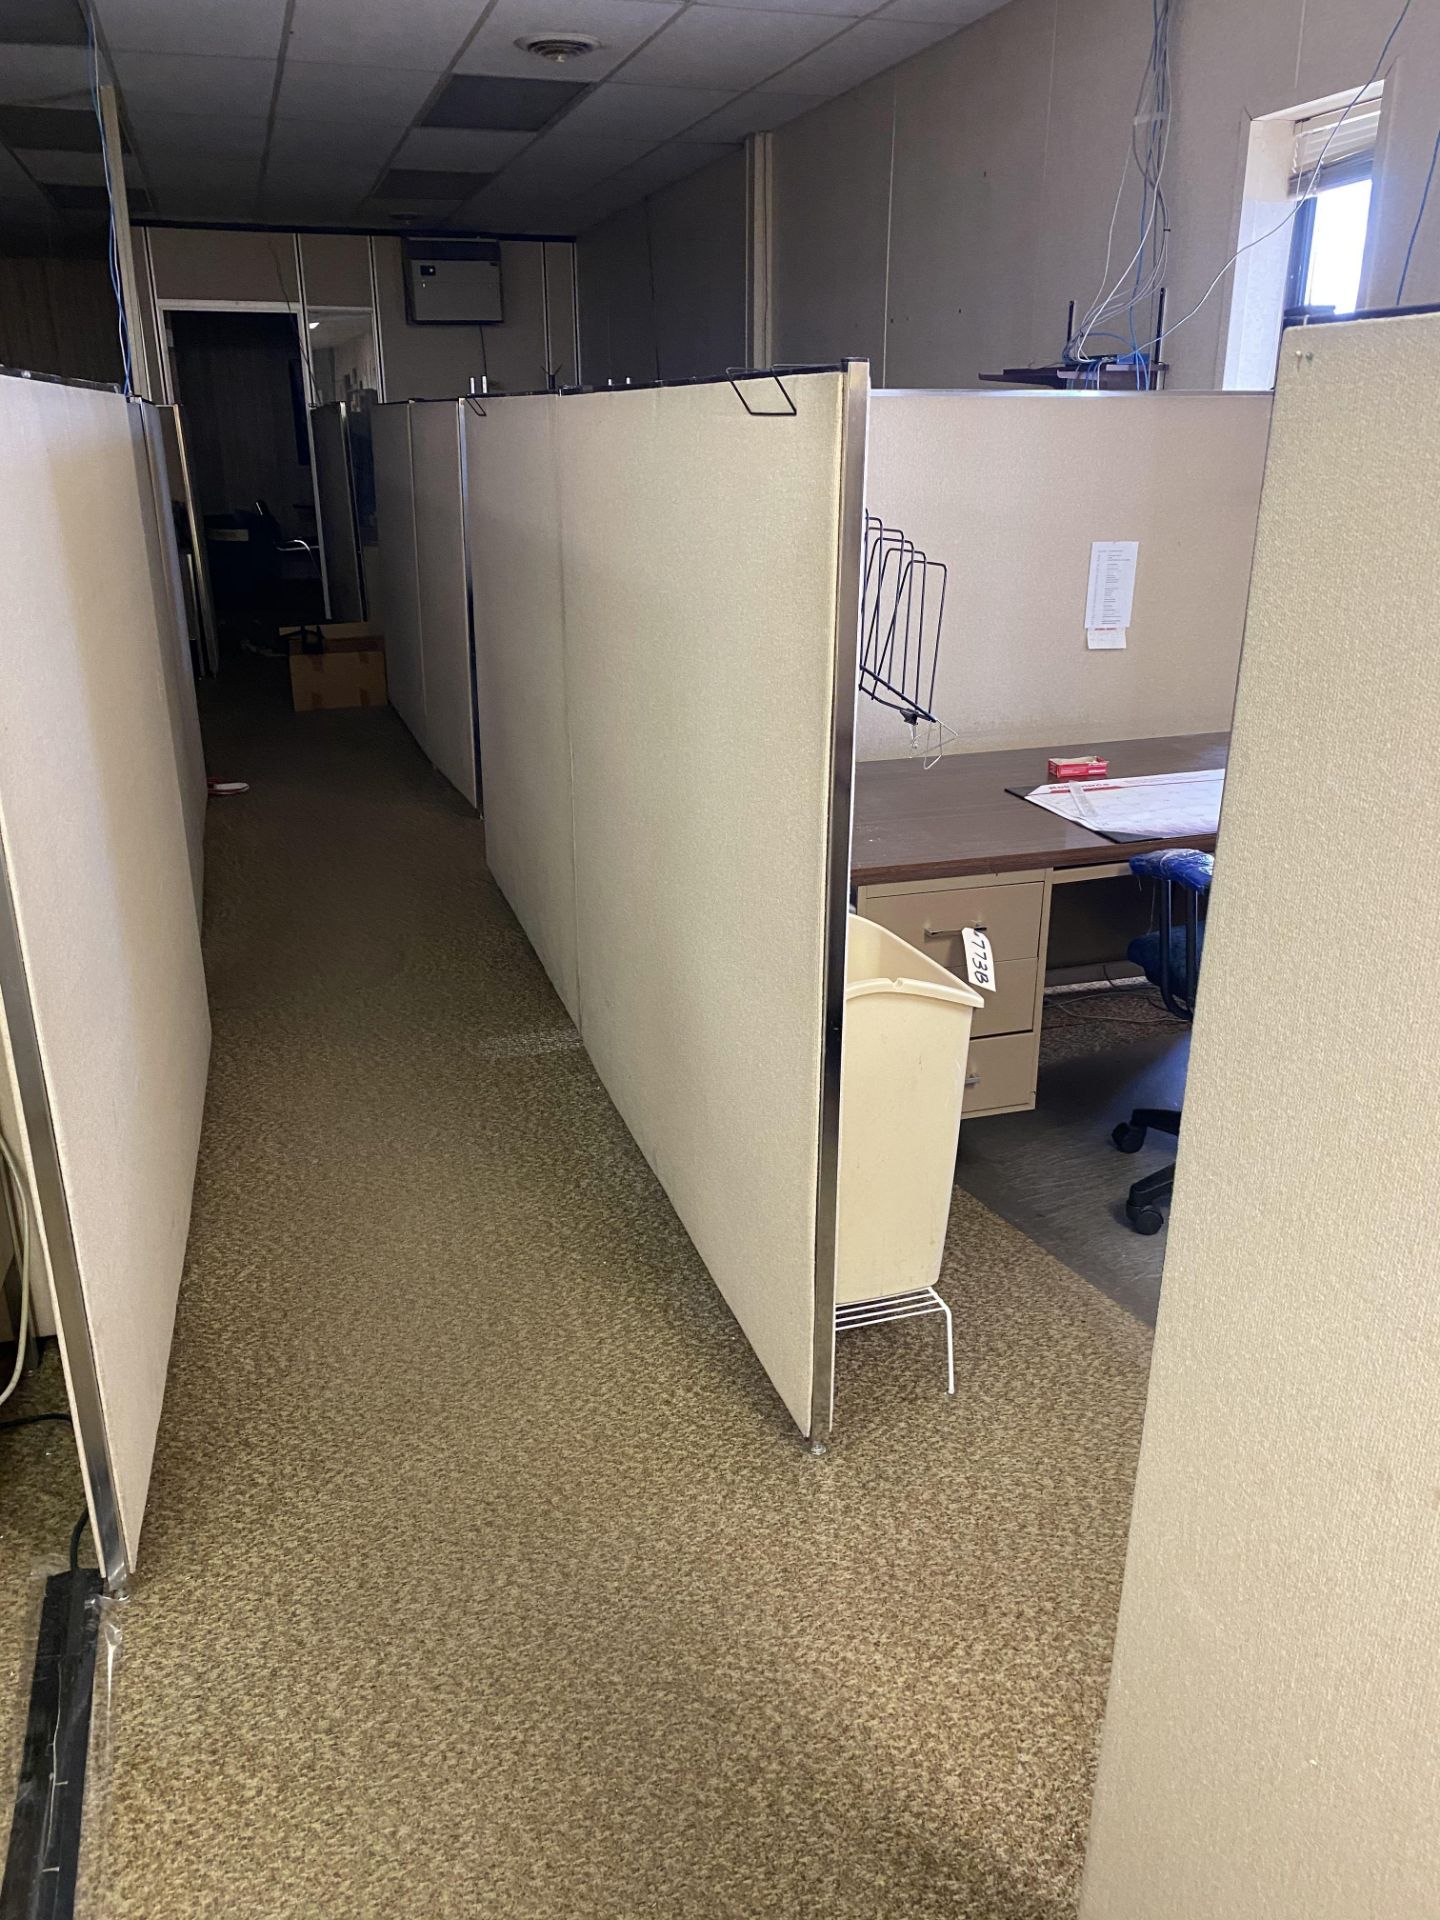 (14) OFFICE CUBICAL WALLS / DIVIDERS - Image 2 of 3